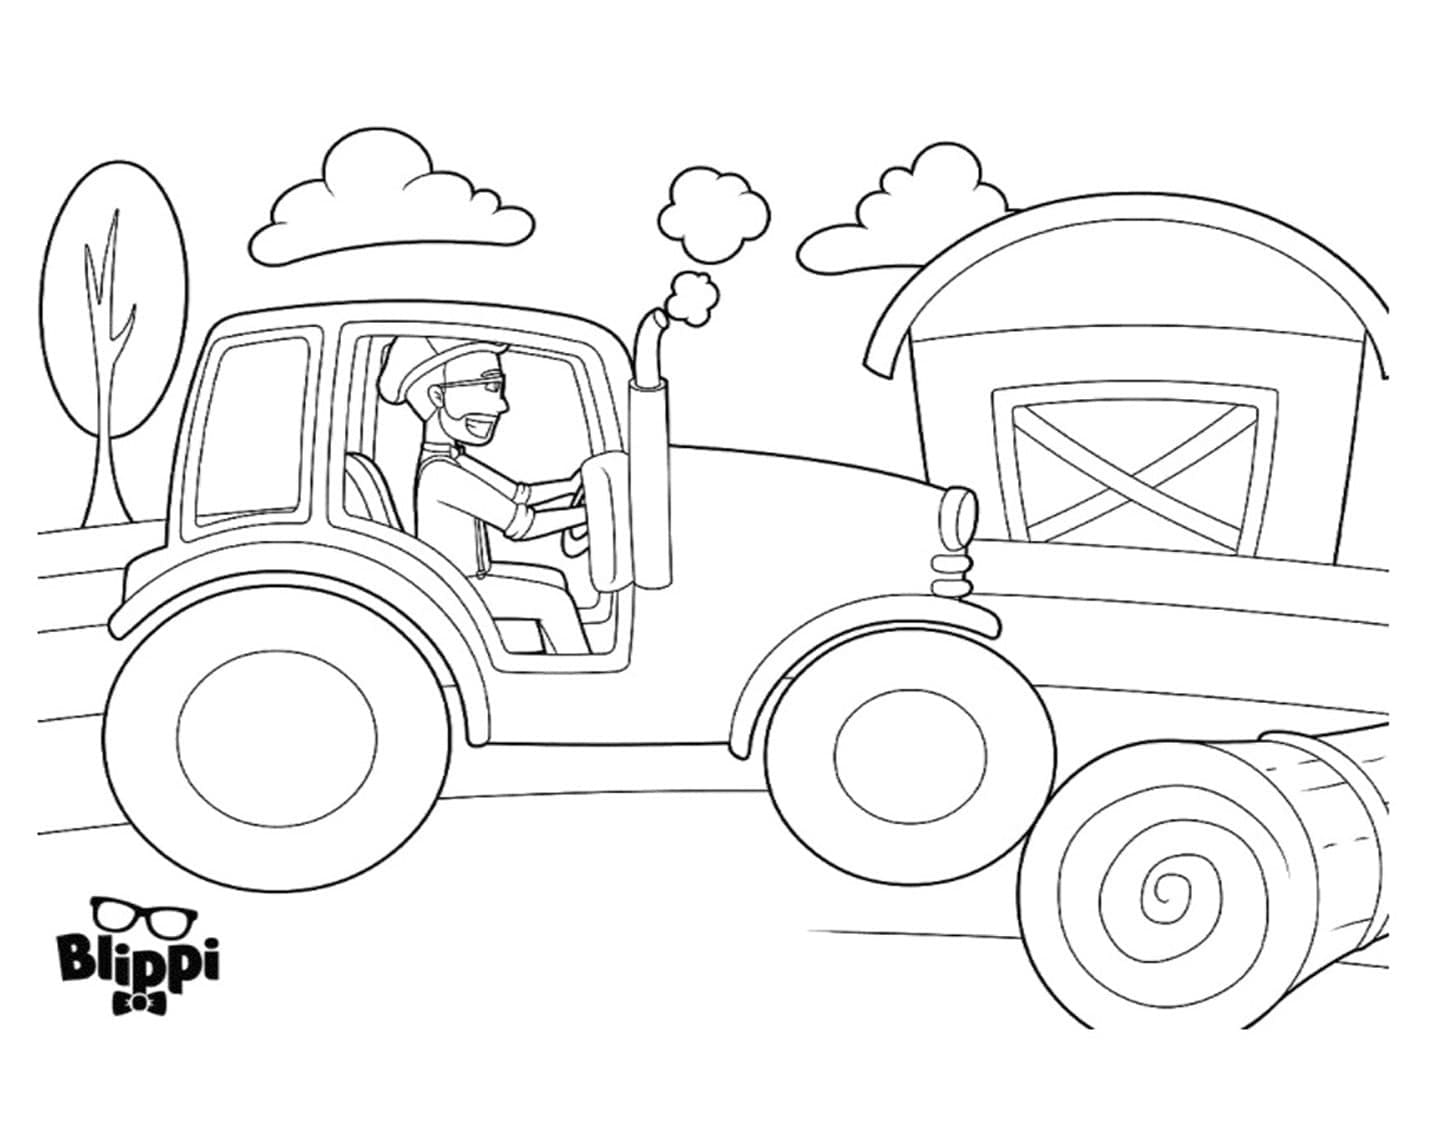 Blippi is driving tractor coloring page